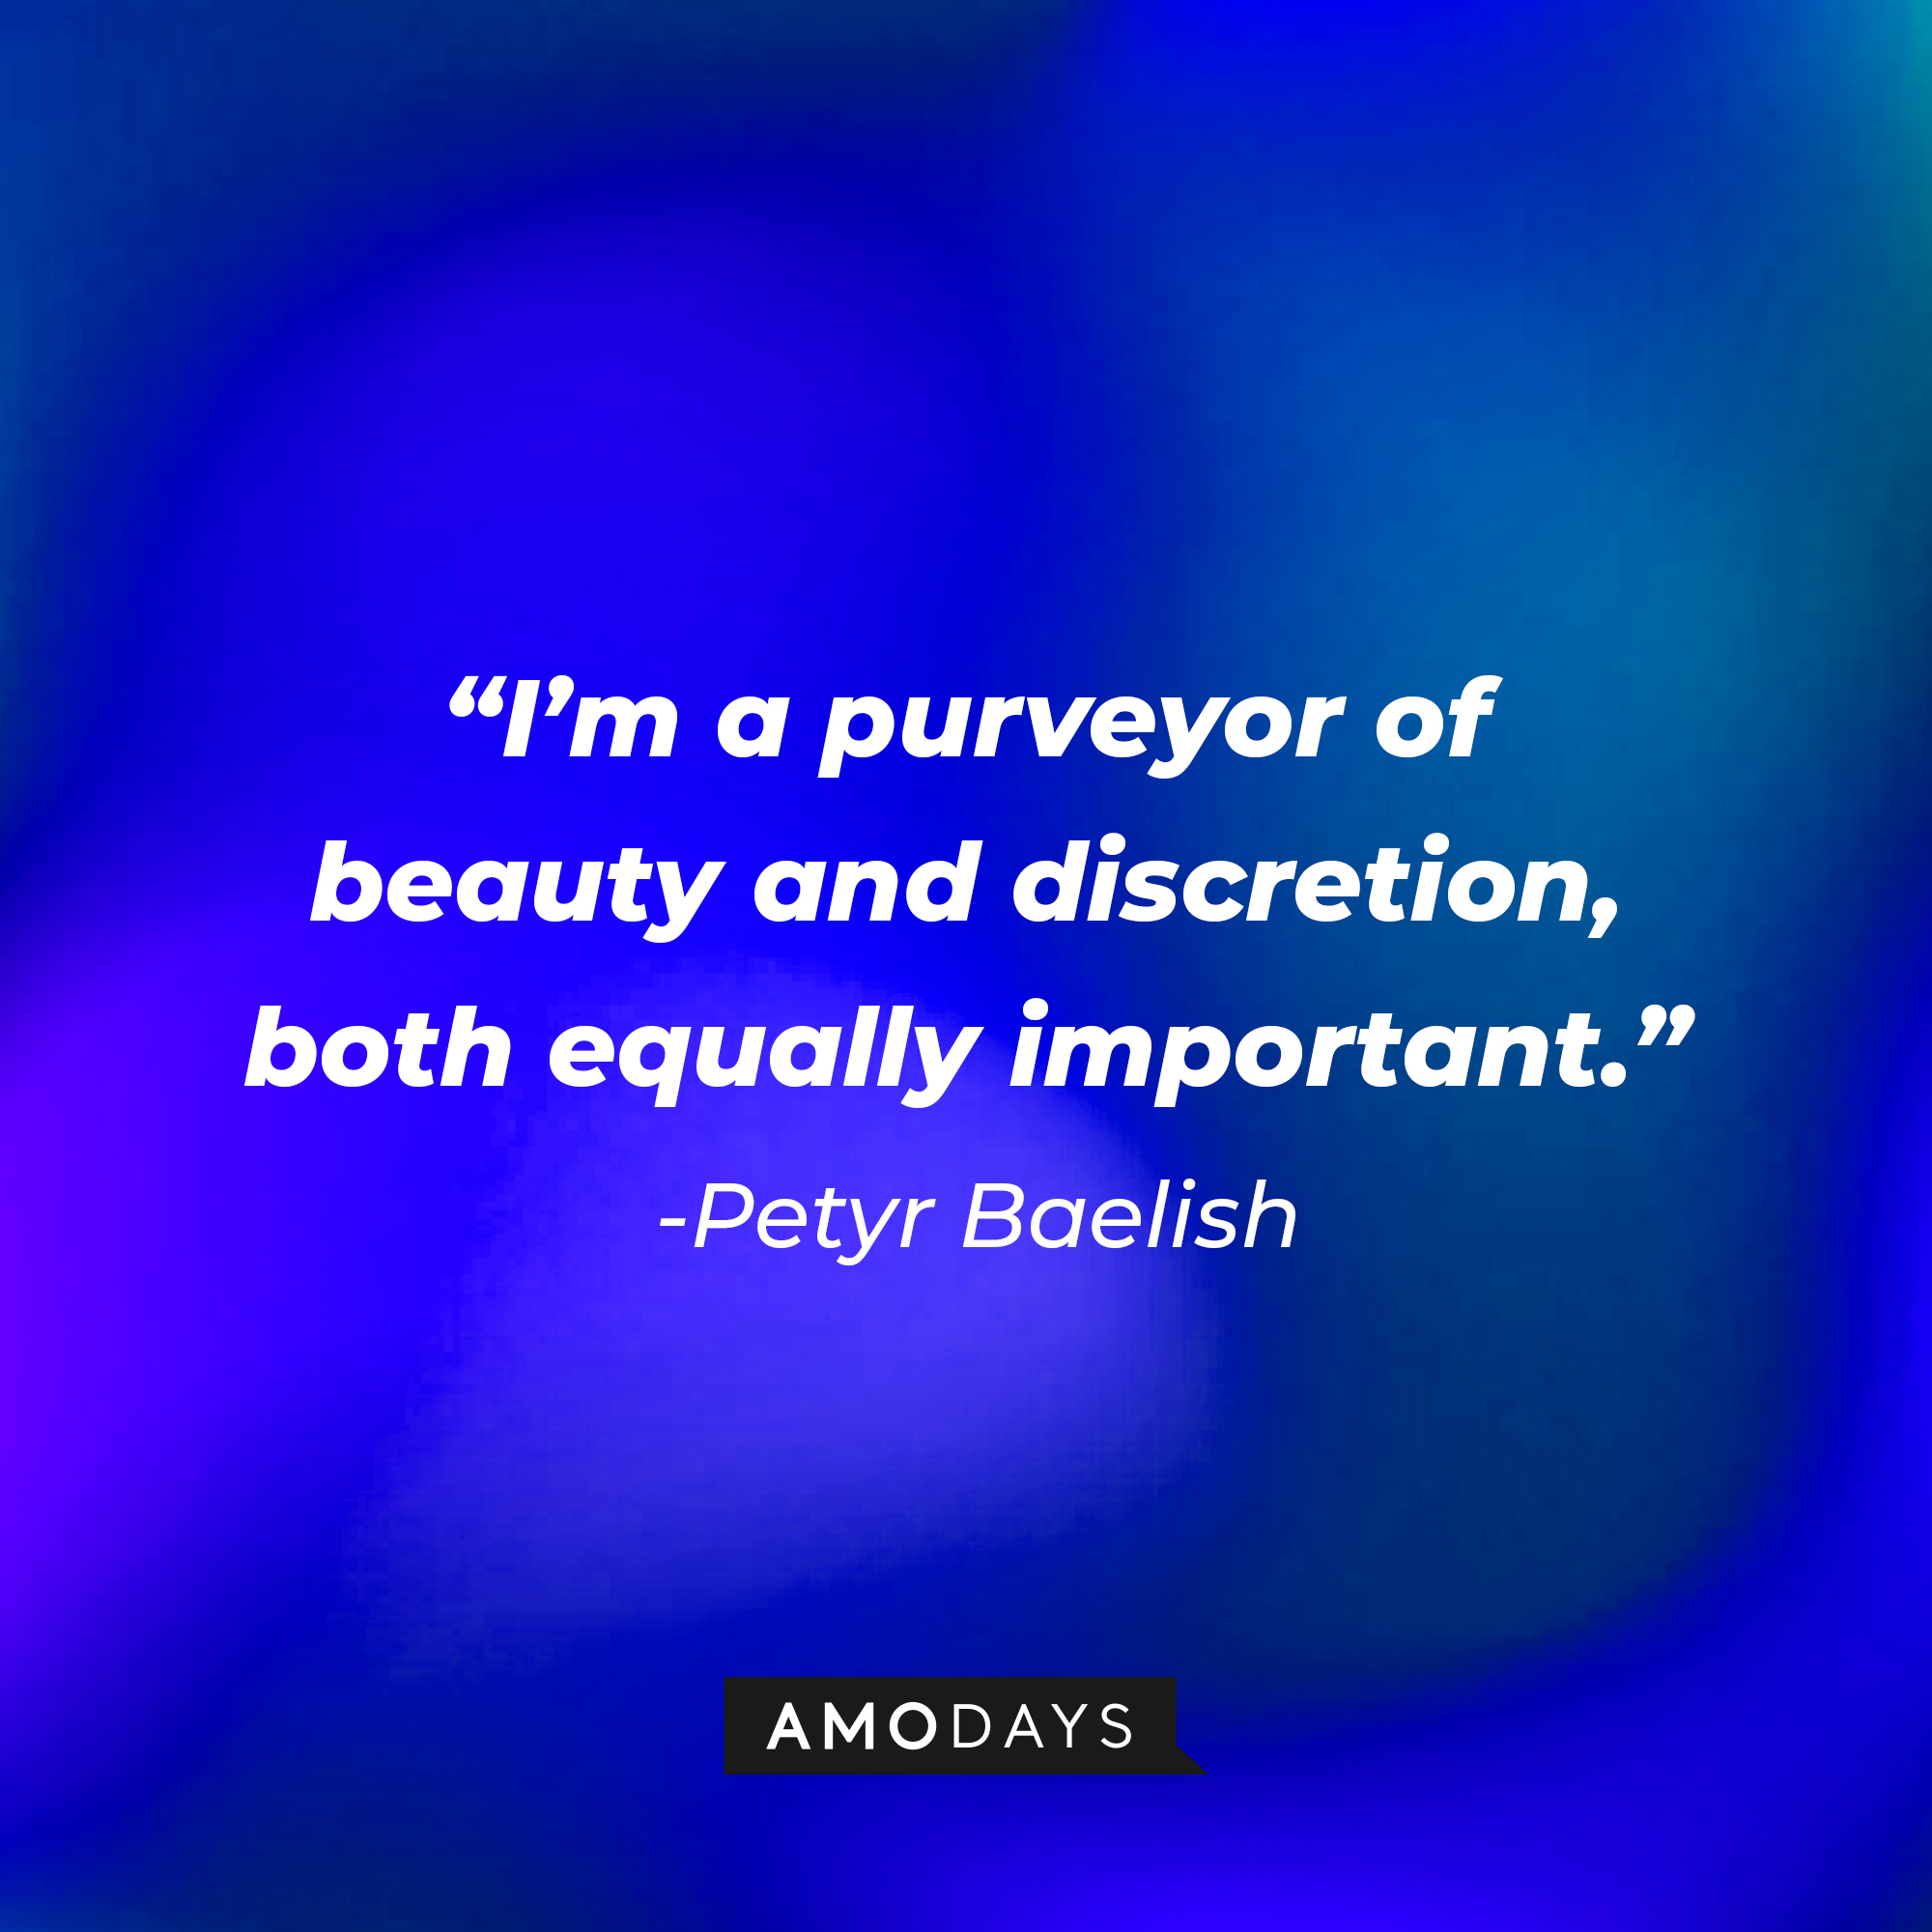 Petyr Baelish’s quote: “I’m a purveyor of beauty and discretion, both equally important.”   | Source: AmoDays